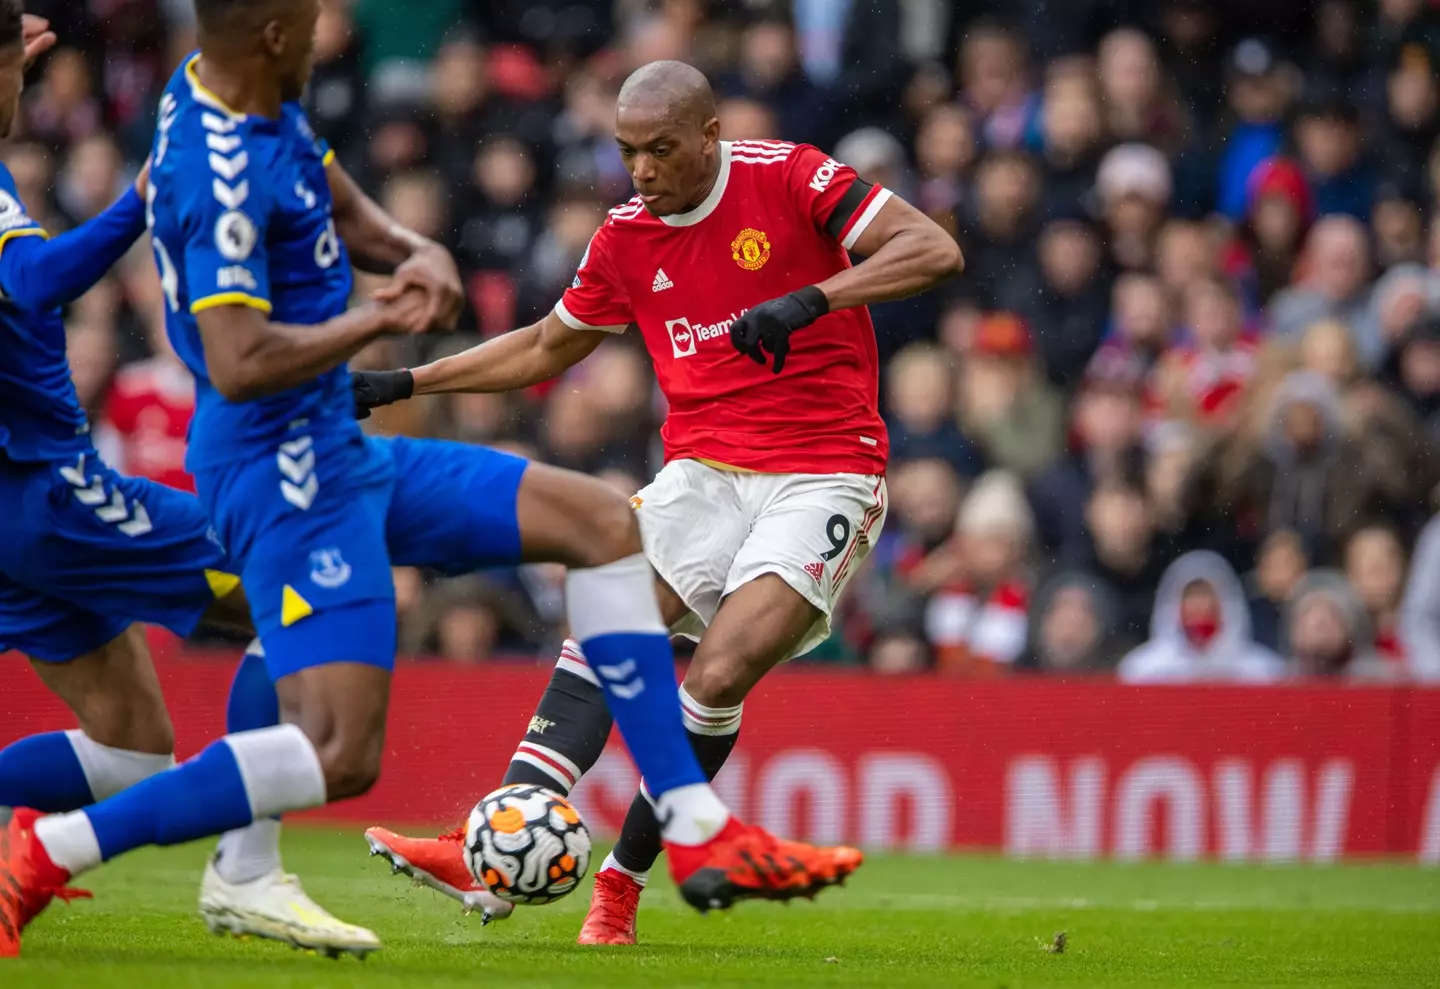 Martial is said to be unhappy with his lack of game time at Old Trafford (Image credit: PA)